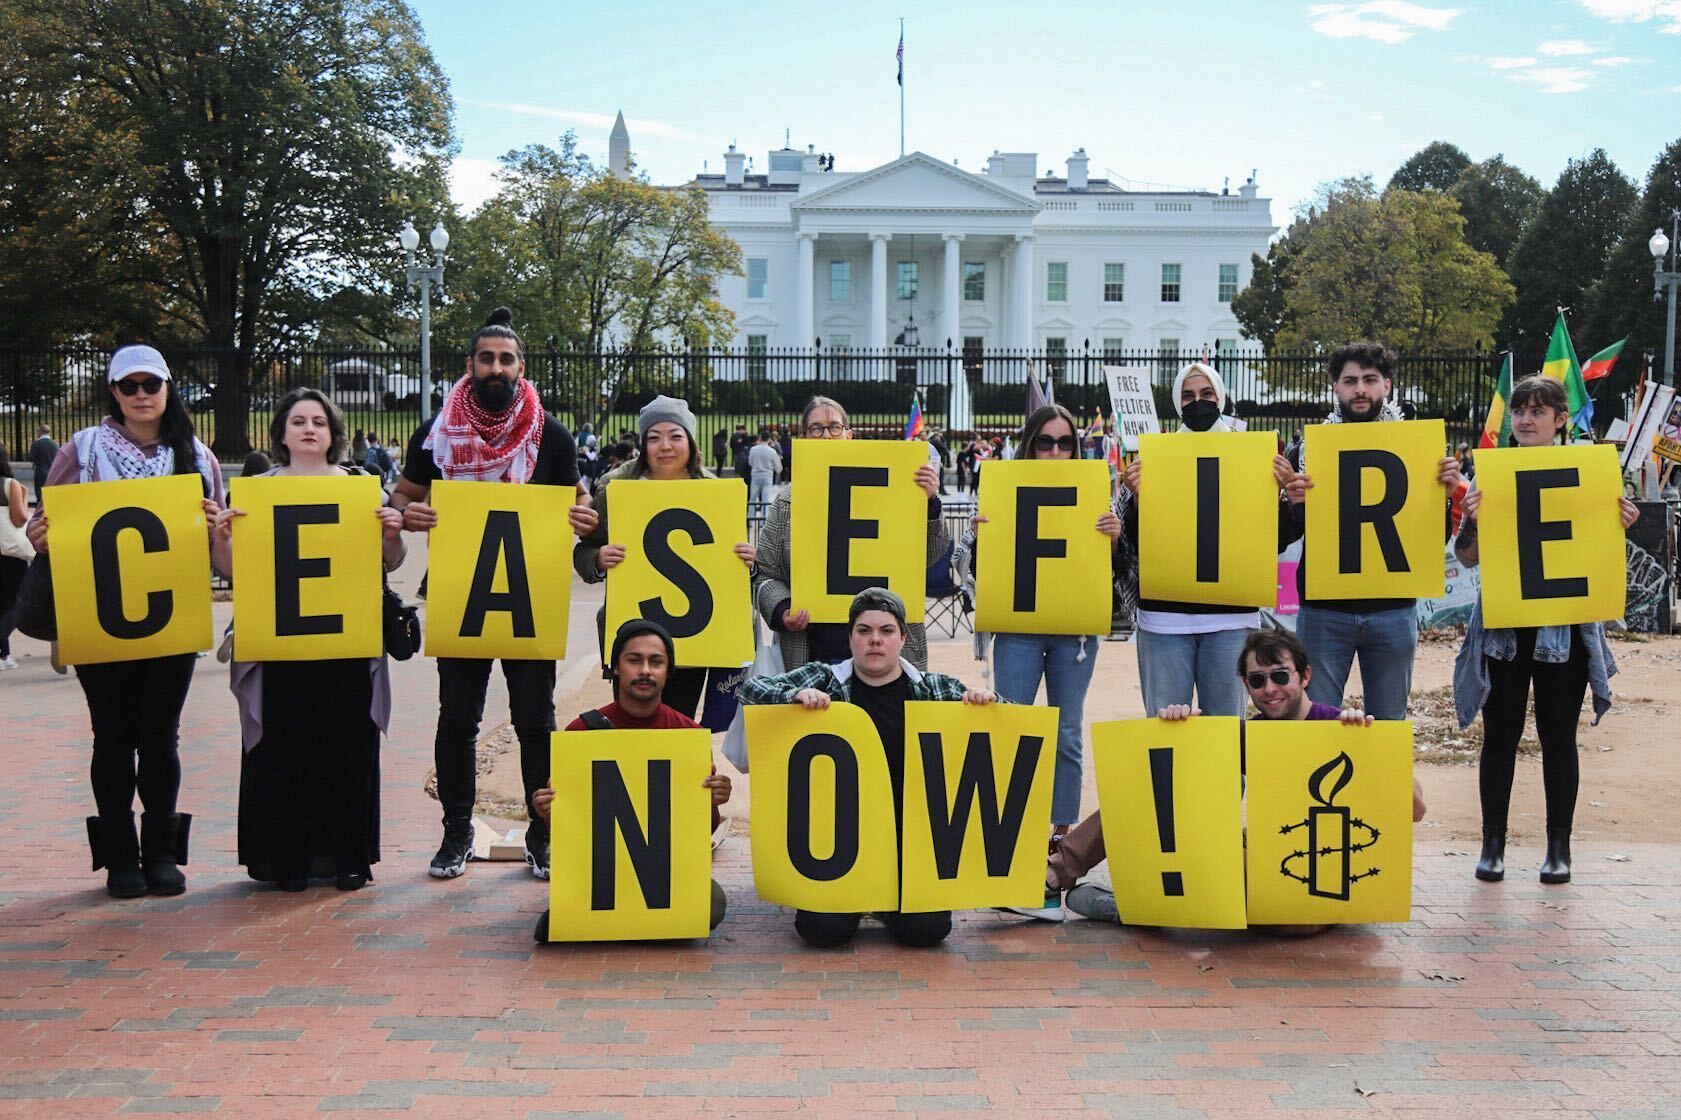 Amnesty supporters hold signs that spell out "ceasefire now!"